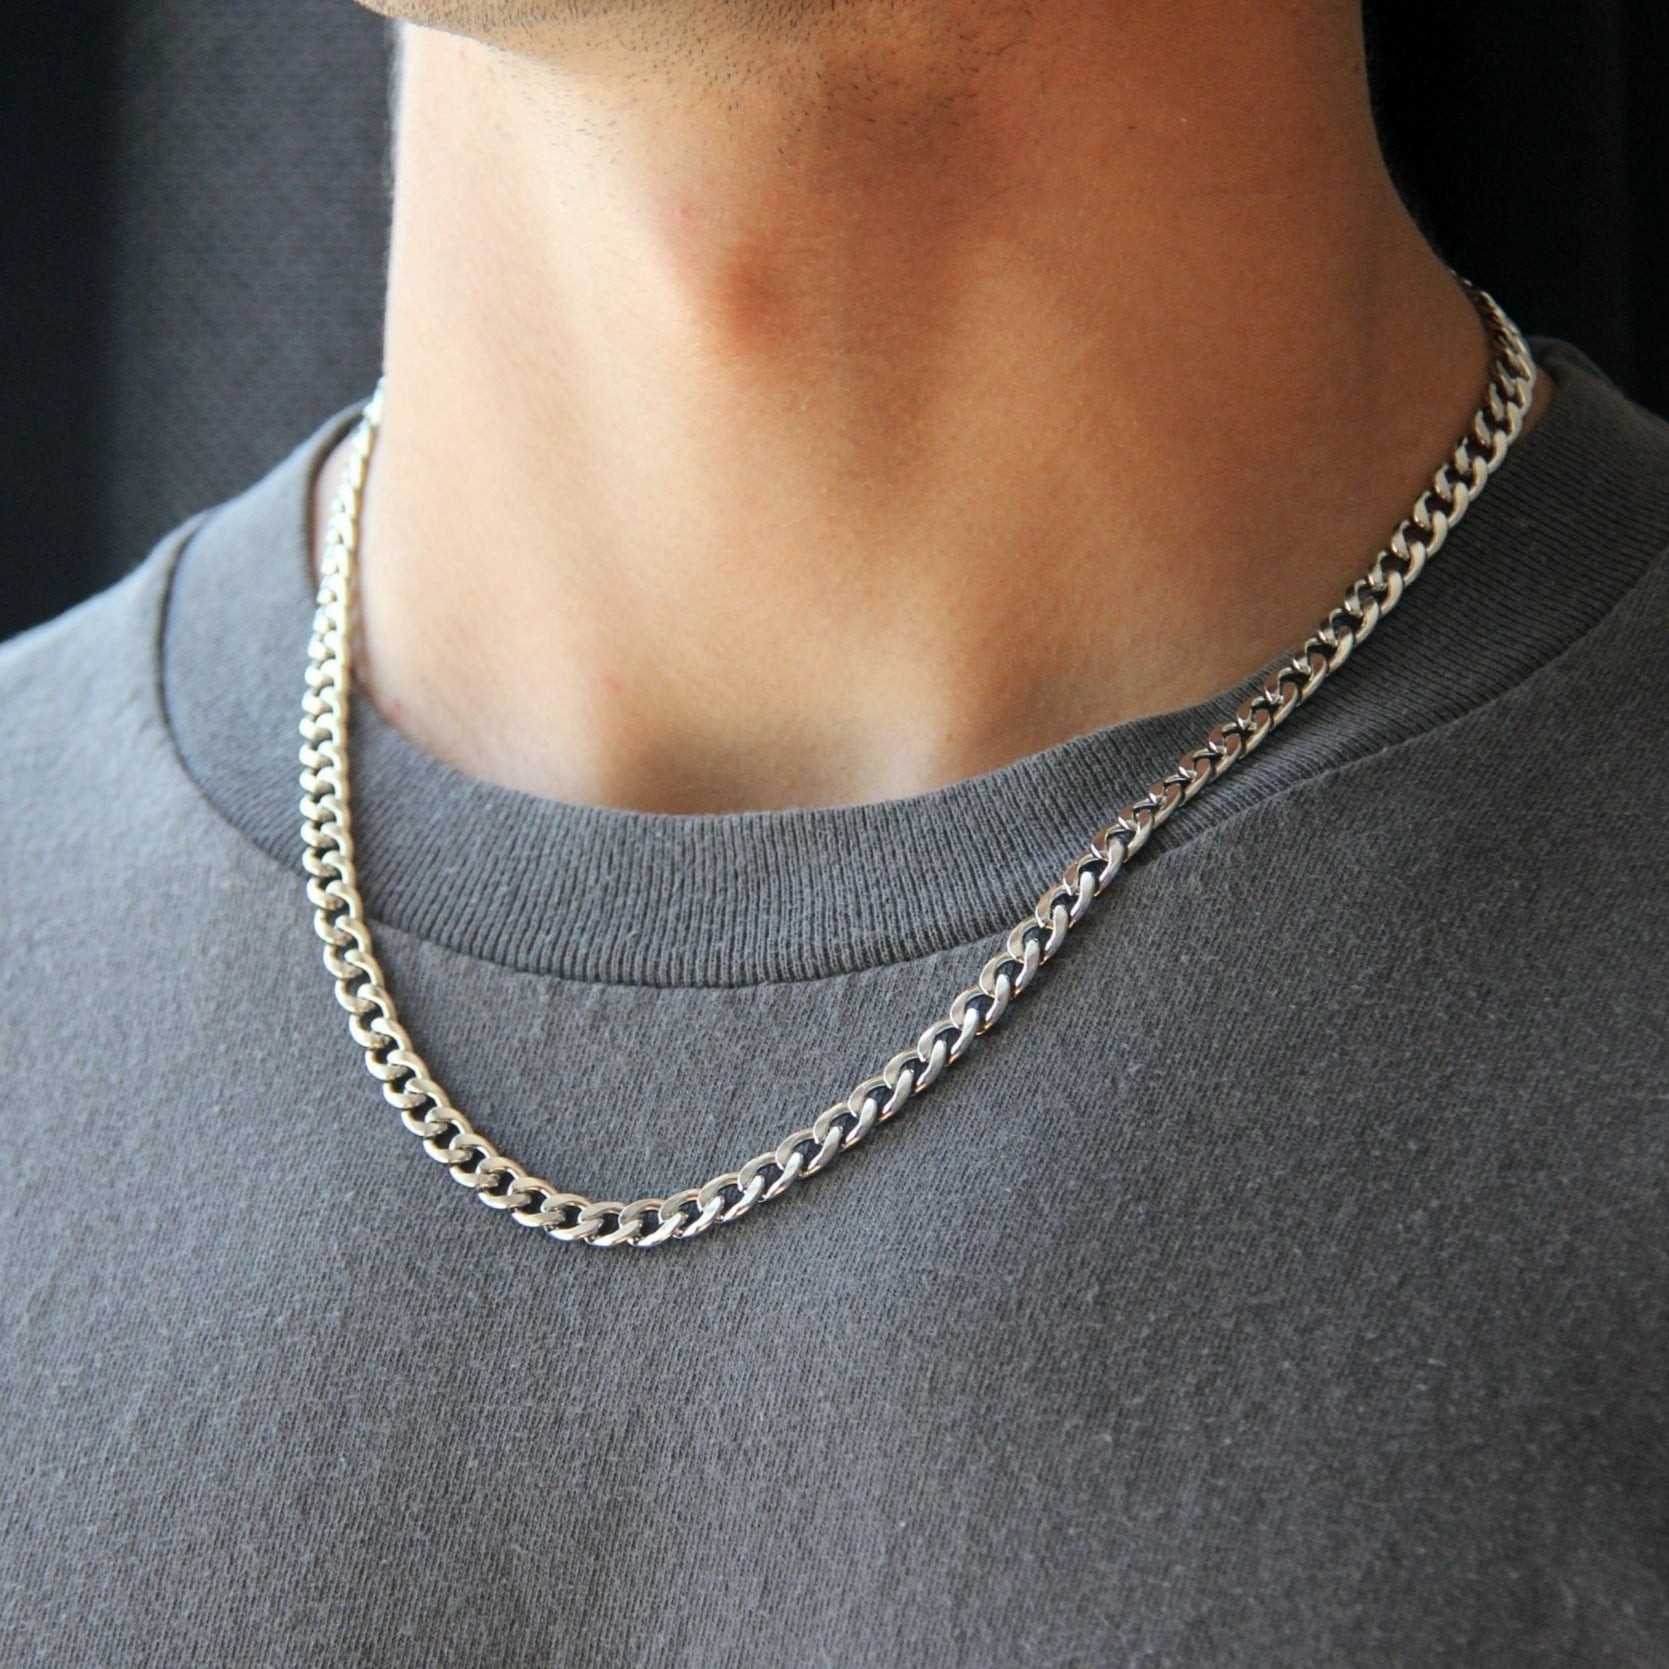 Logo Chain Necklace in silver